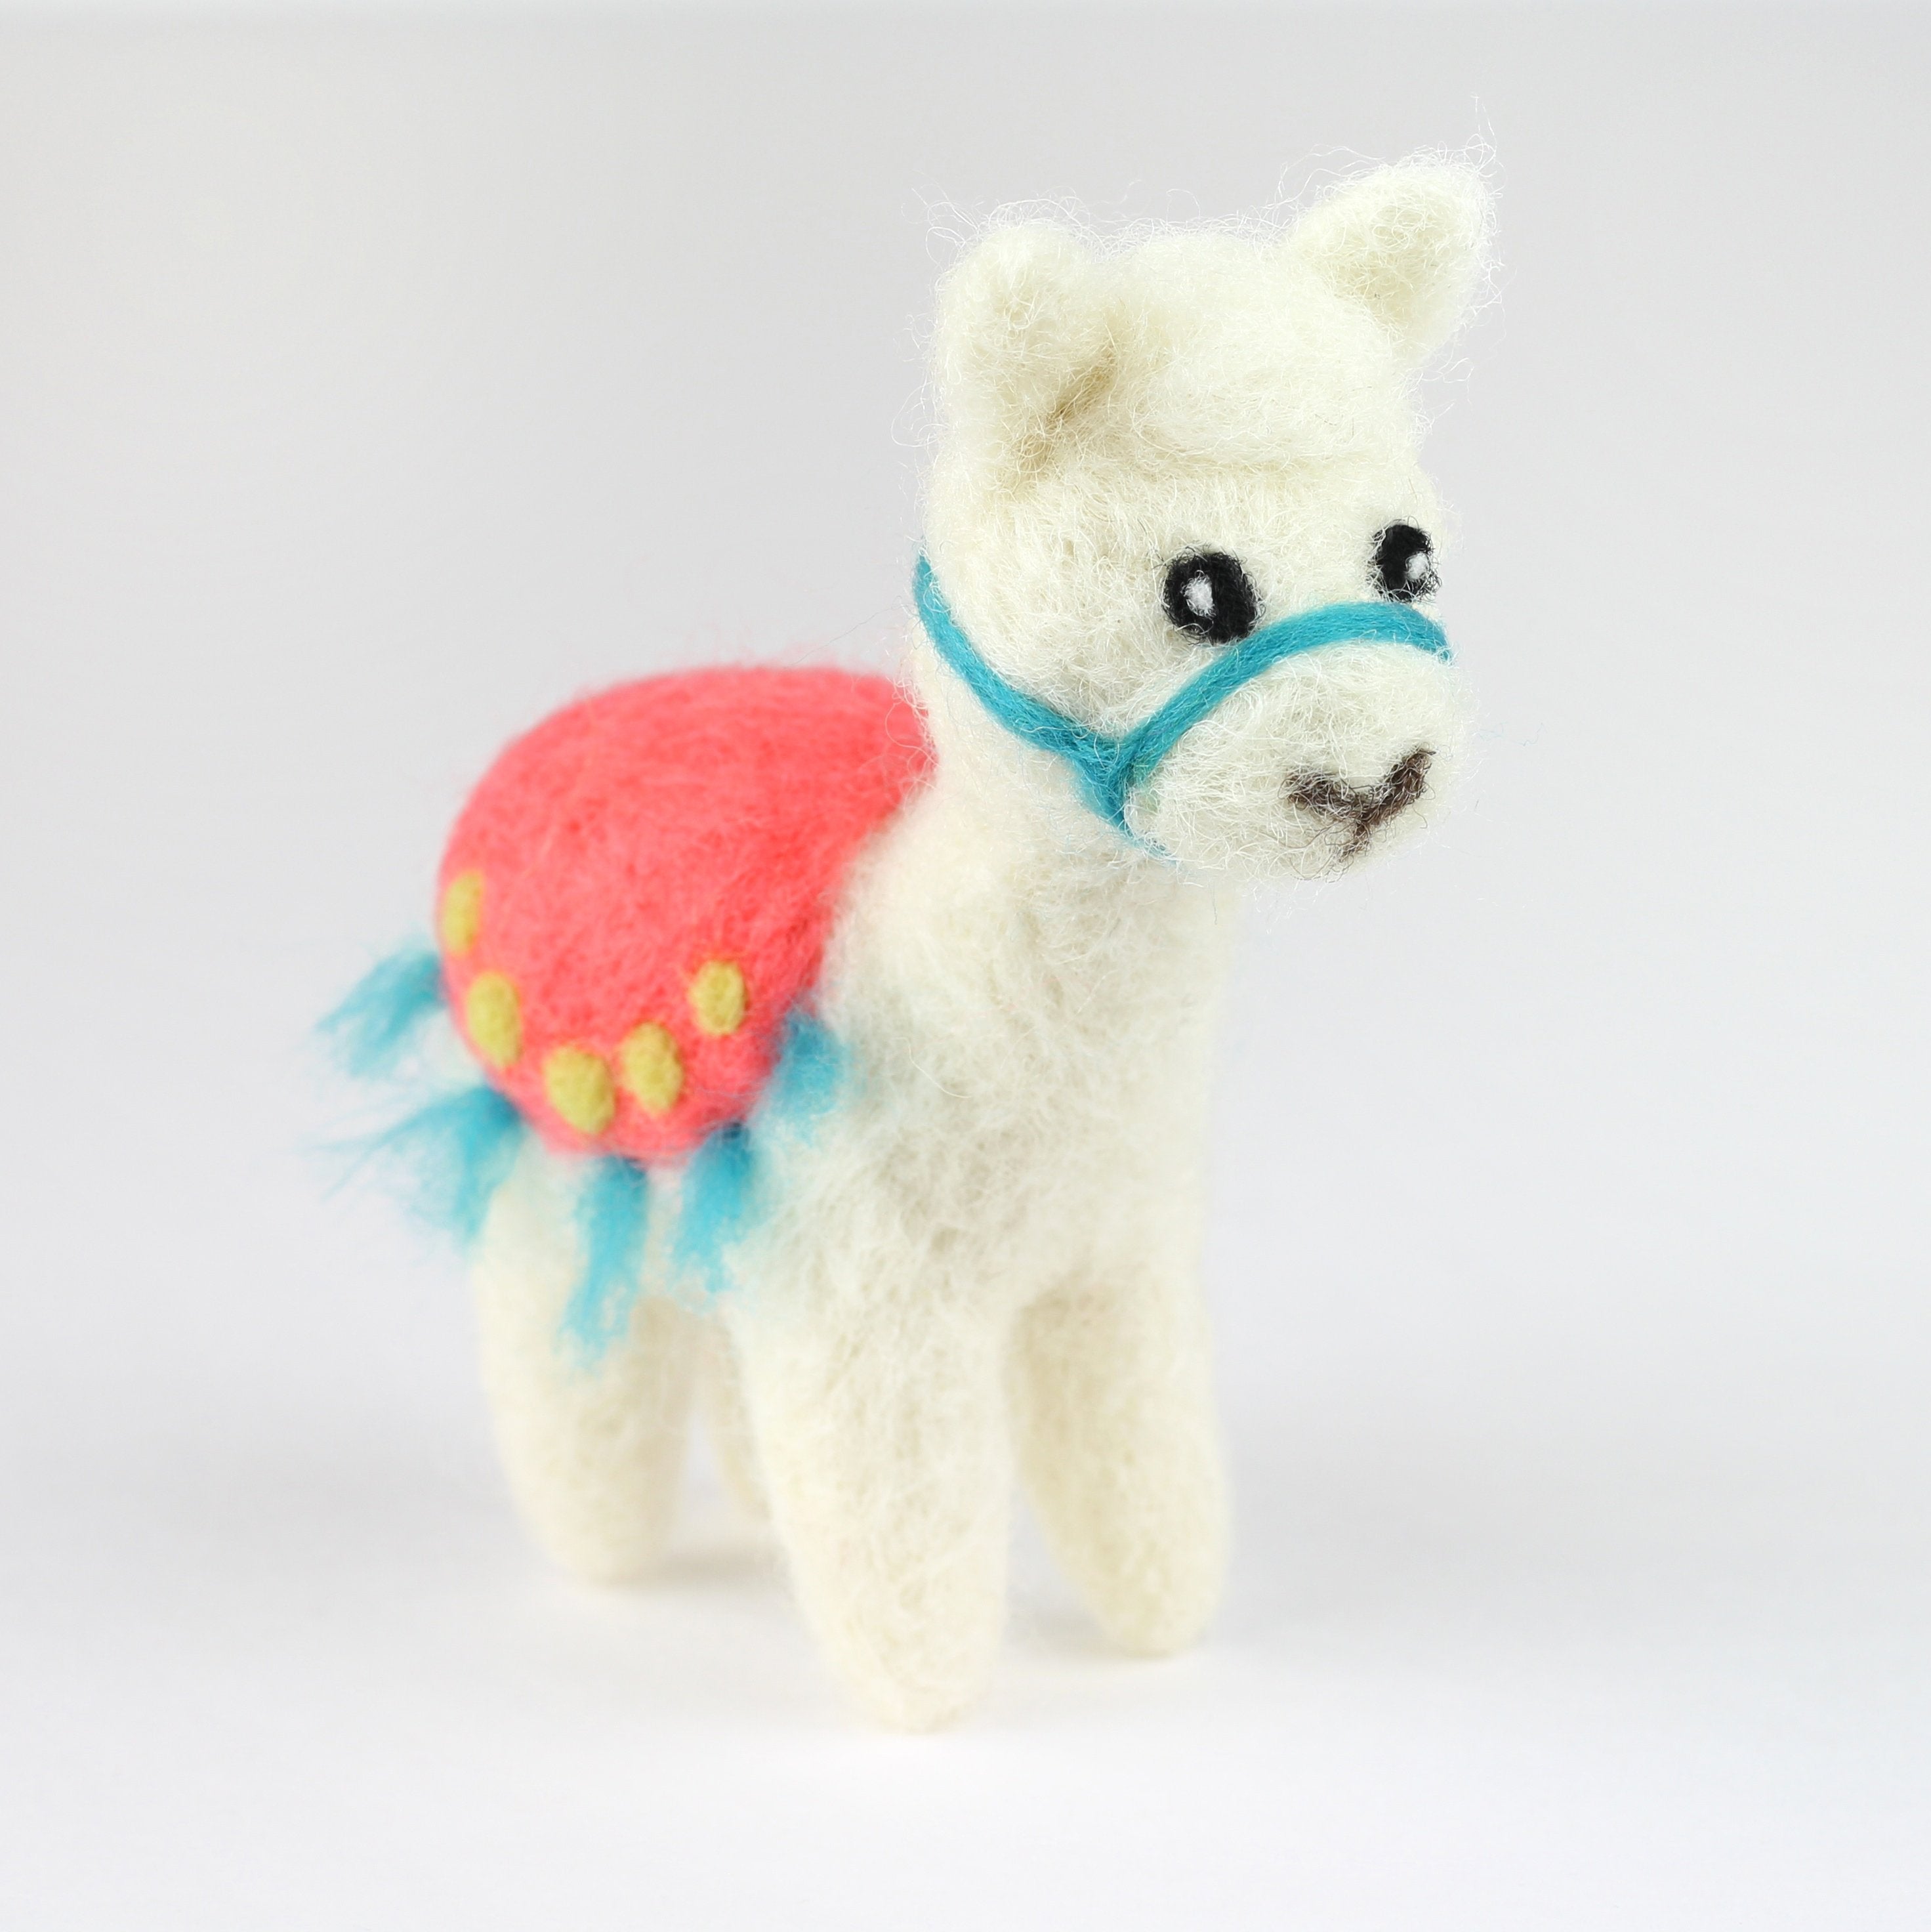 Front View of Completed Alpaca Mini Needle Felting Kit